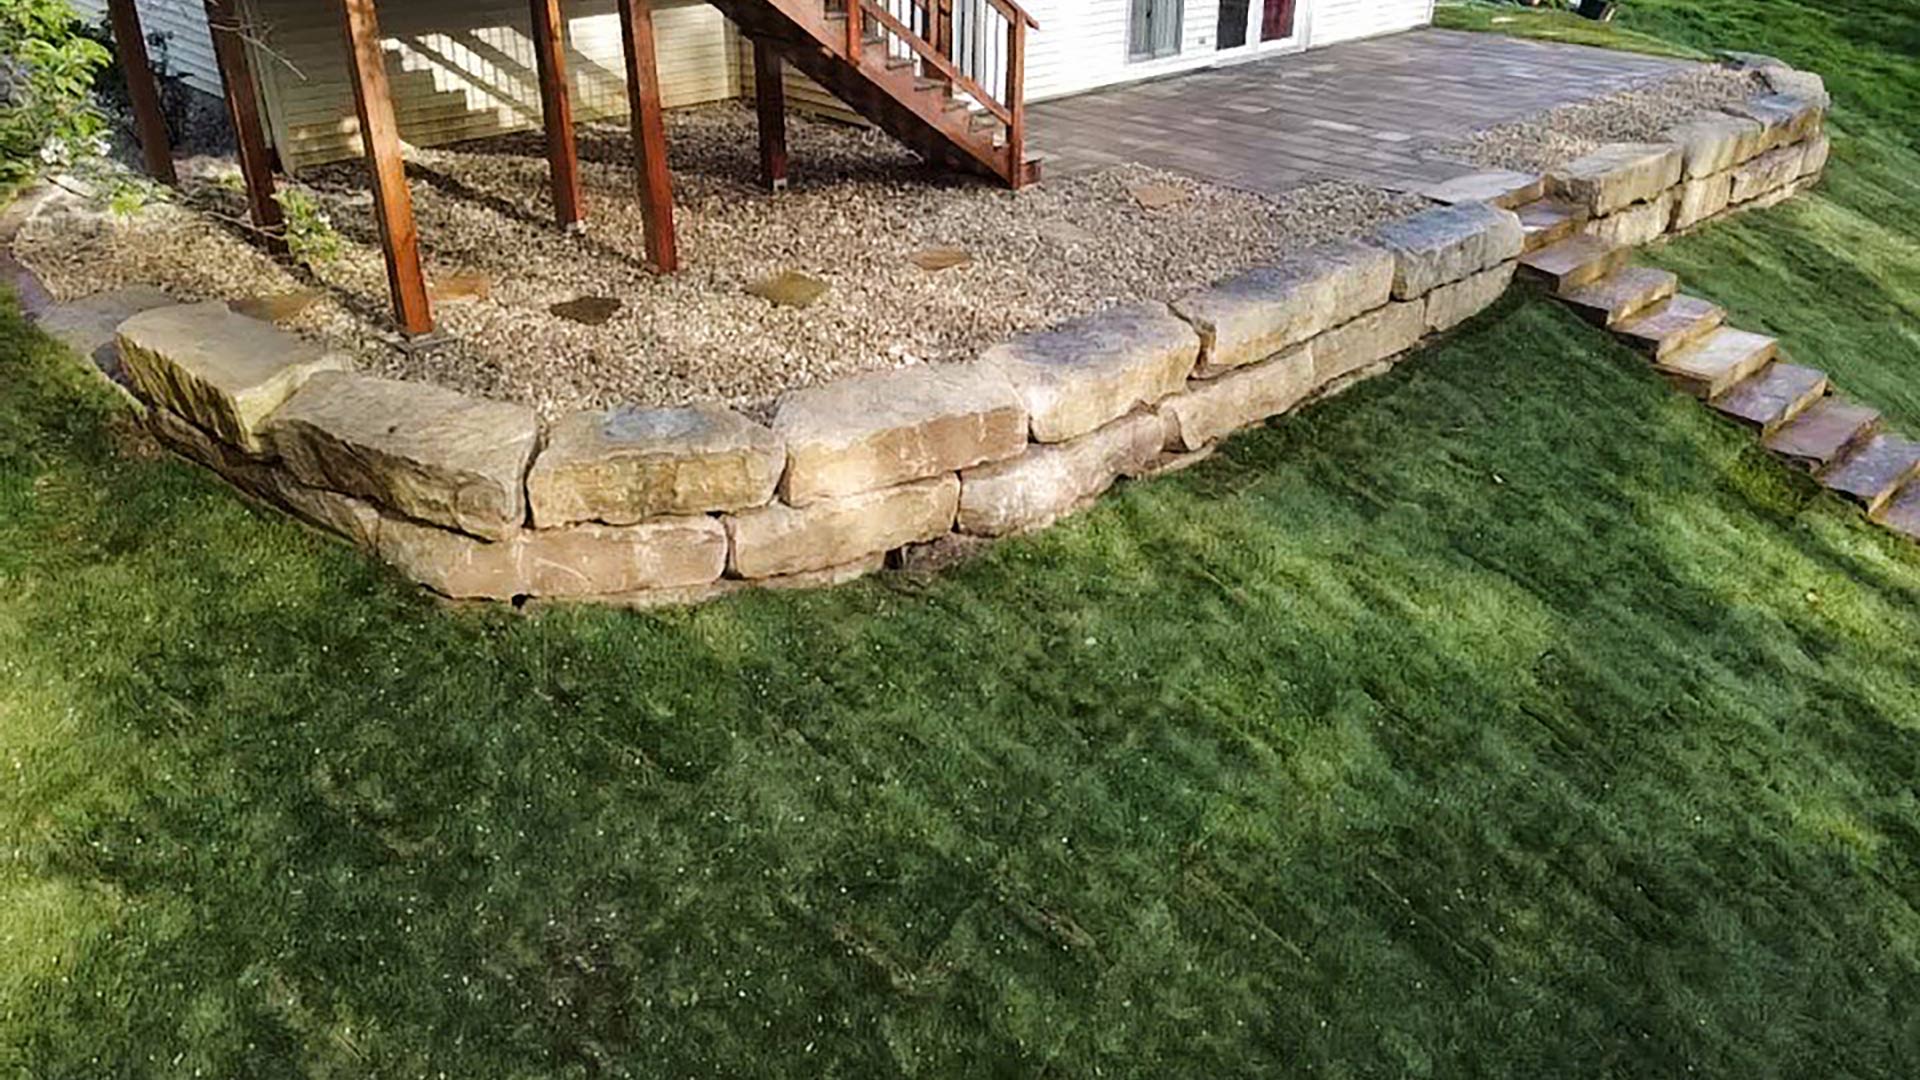 A newly build retaining wall and walkway built in a backyard in Highland, IL.